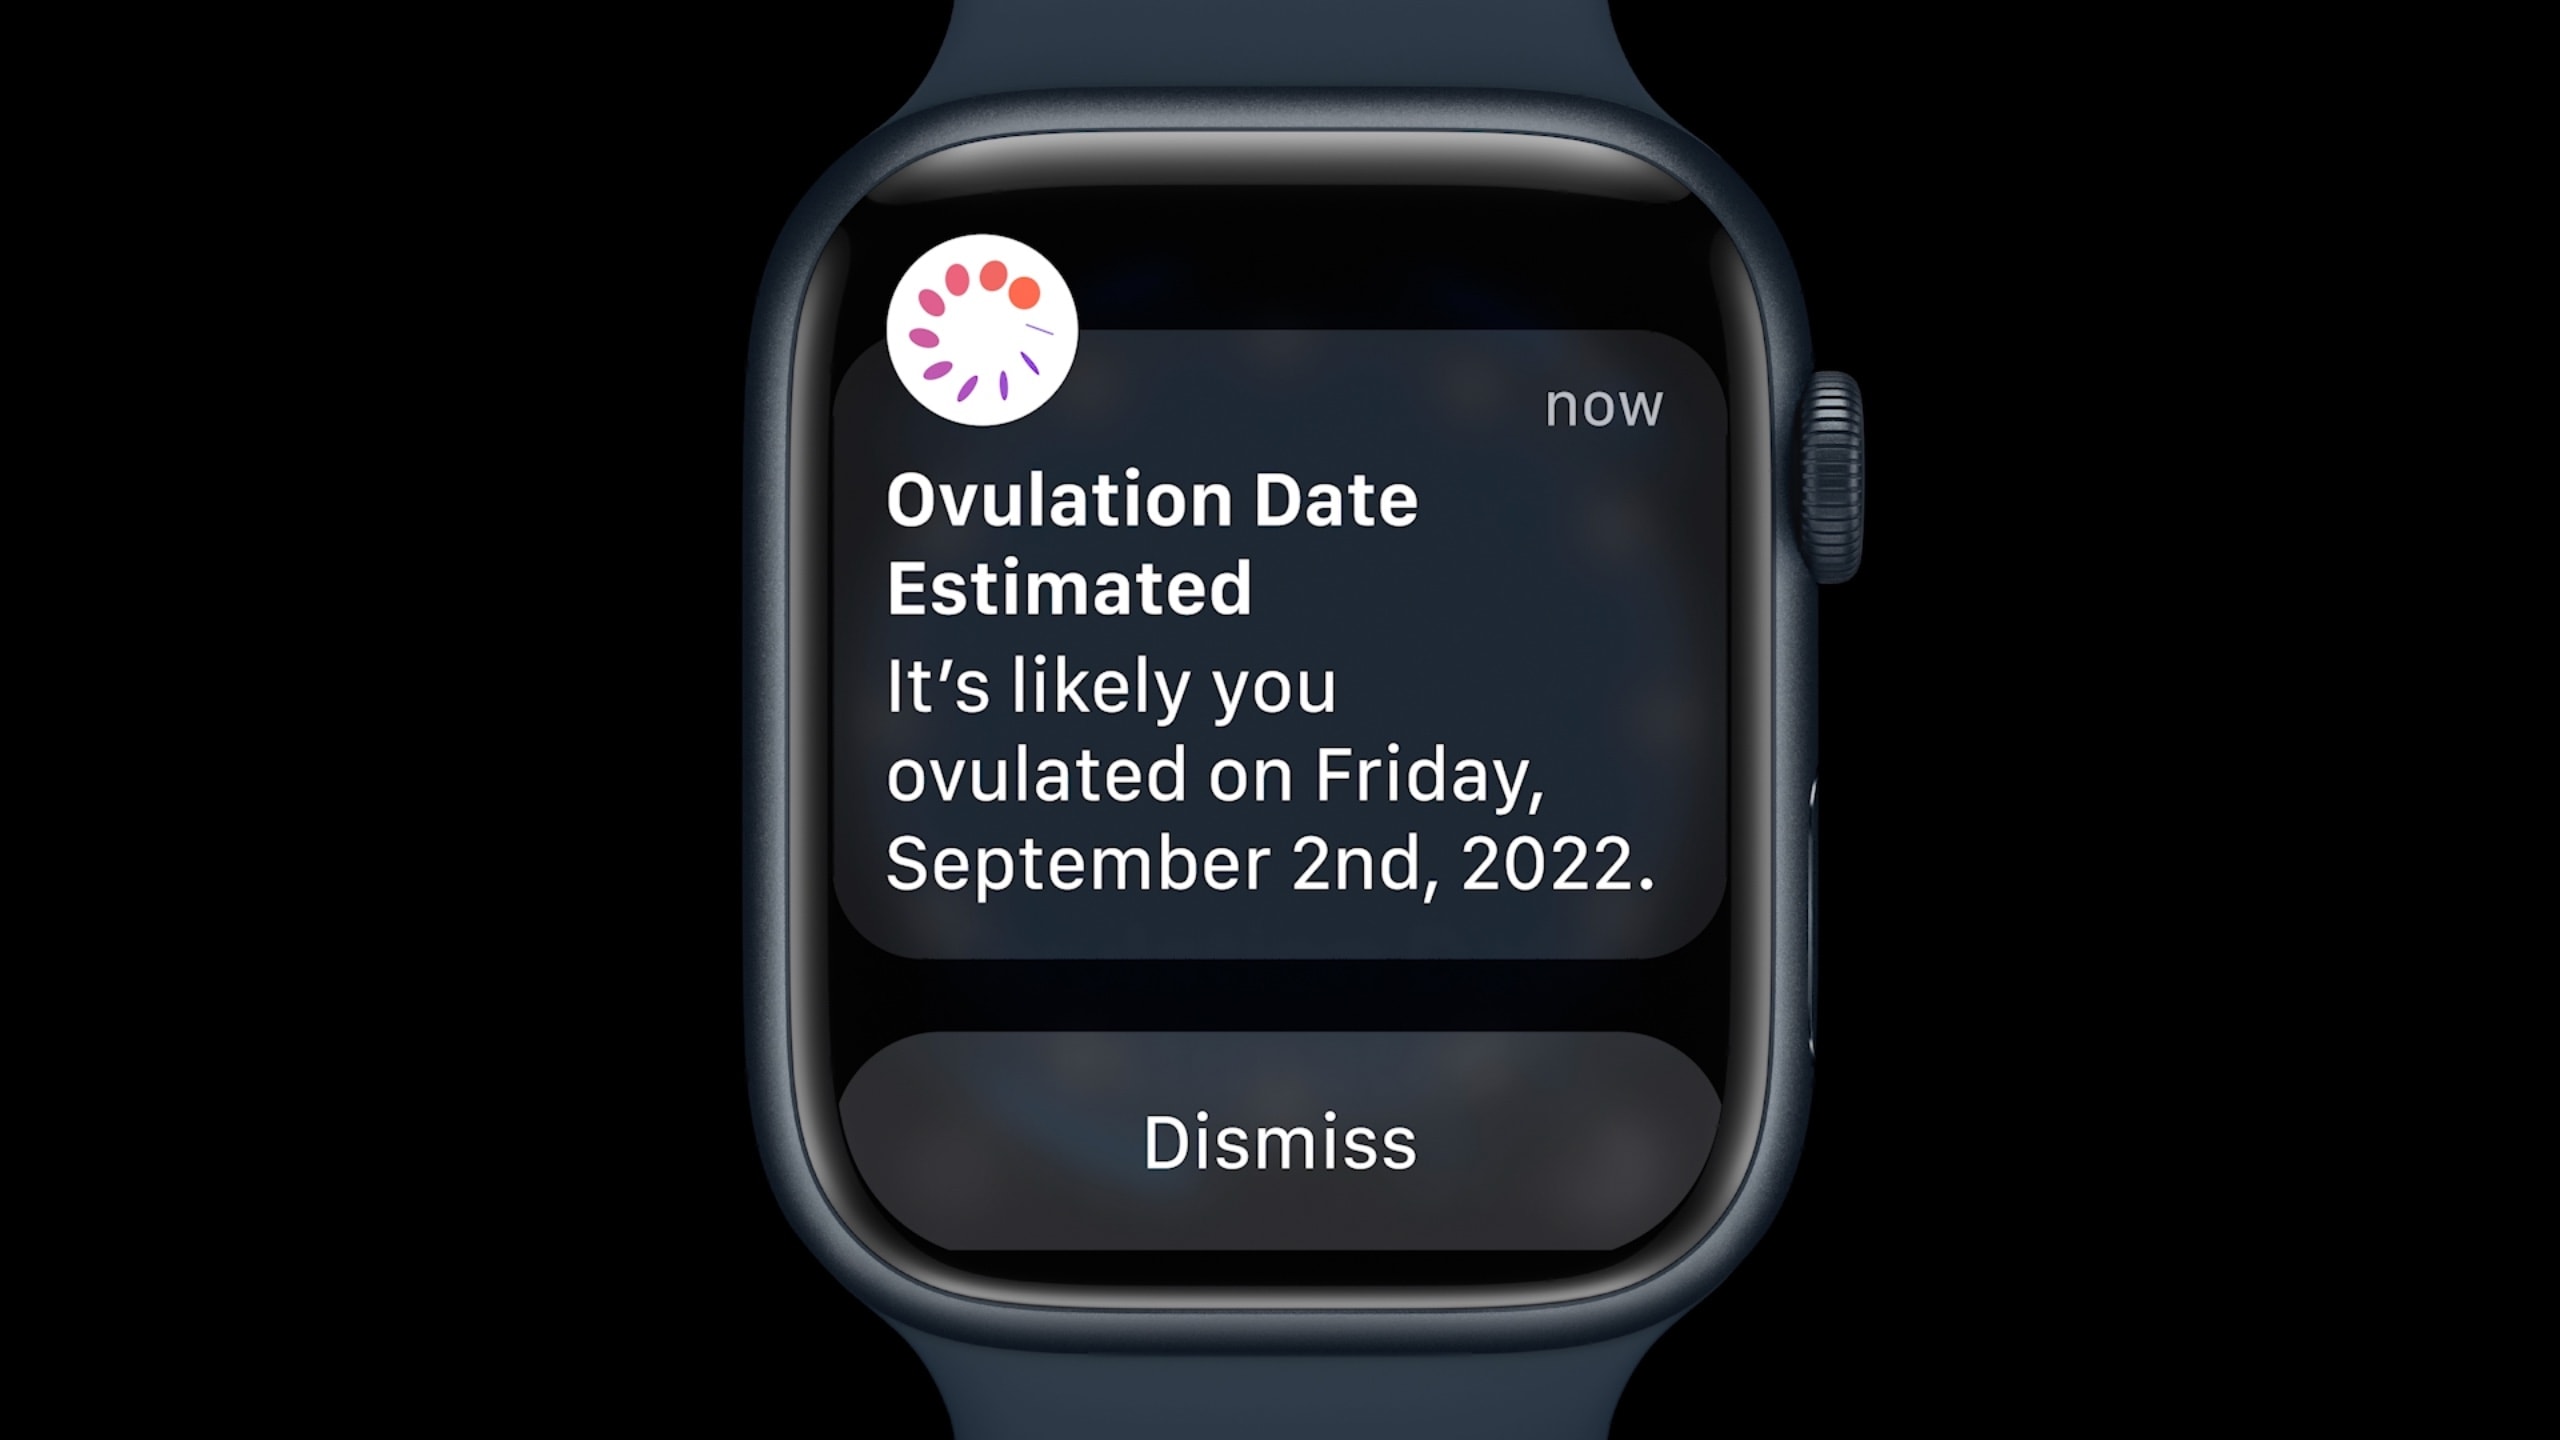 Apple Watch showing ovulation detection alert